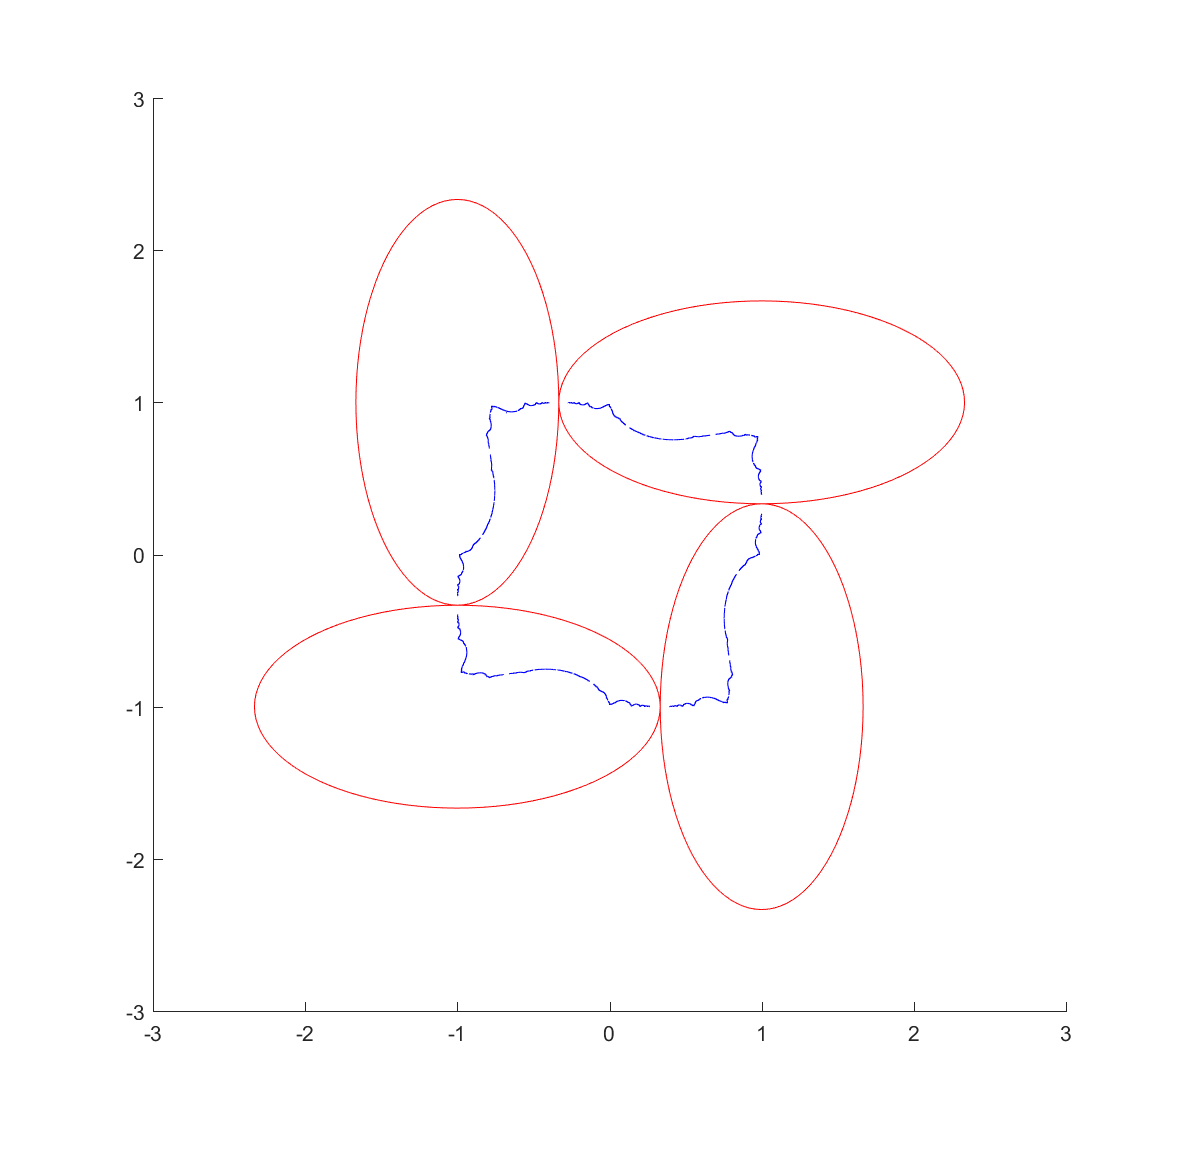 Invariant set fractal (blue) for inversion in the red ellipses. Generated using an IFS algorithm.